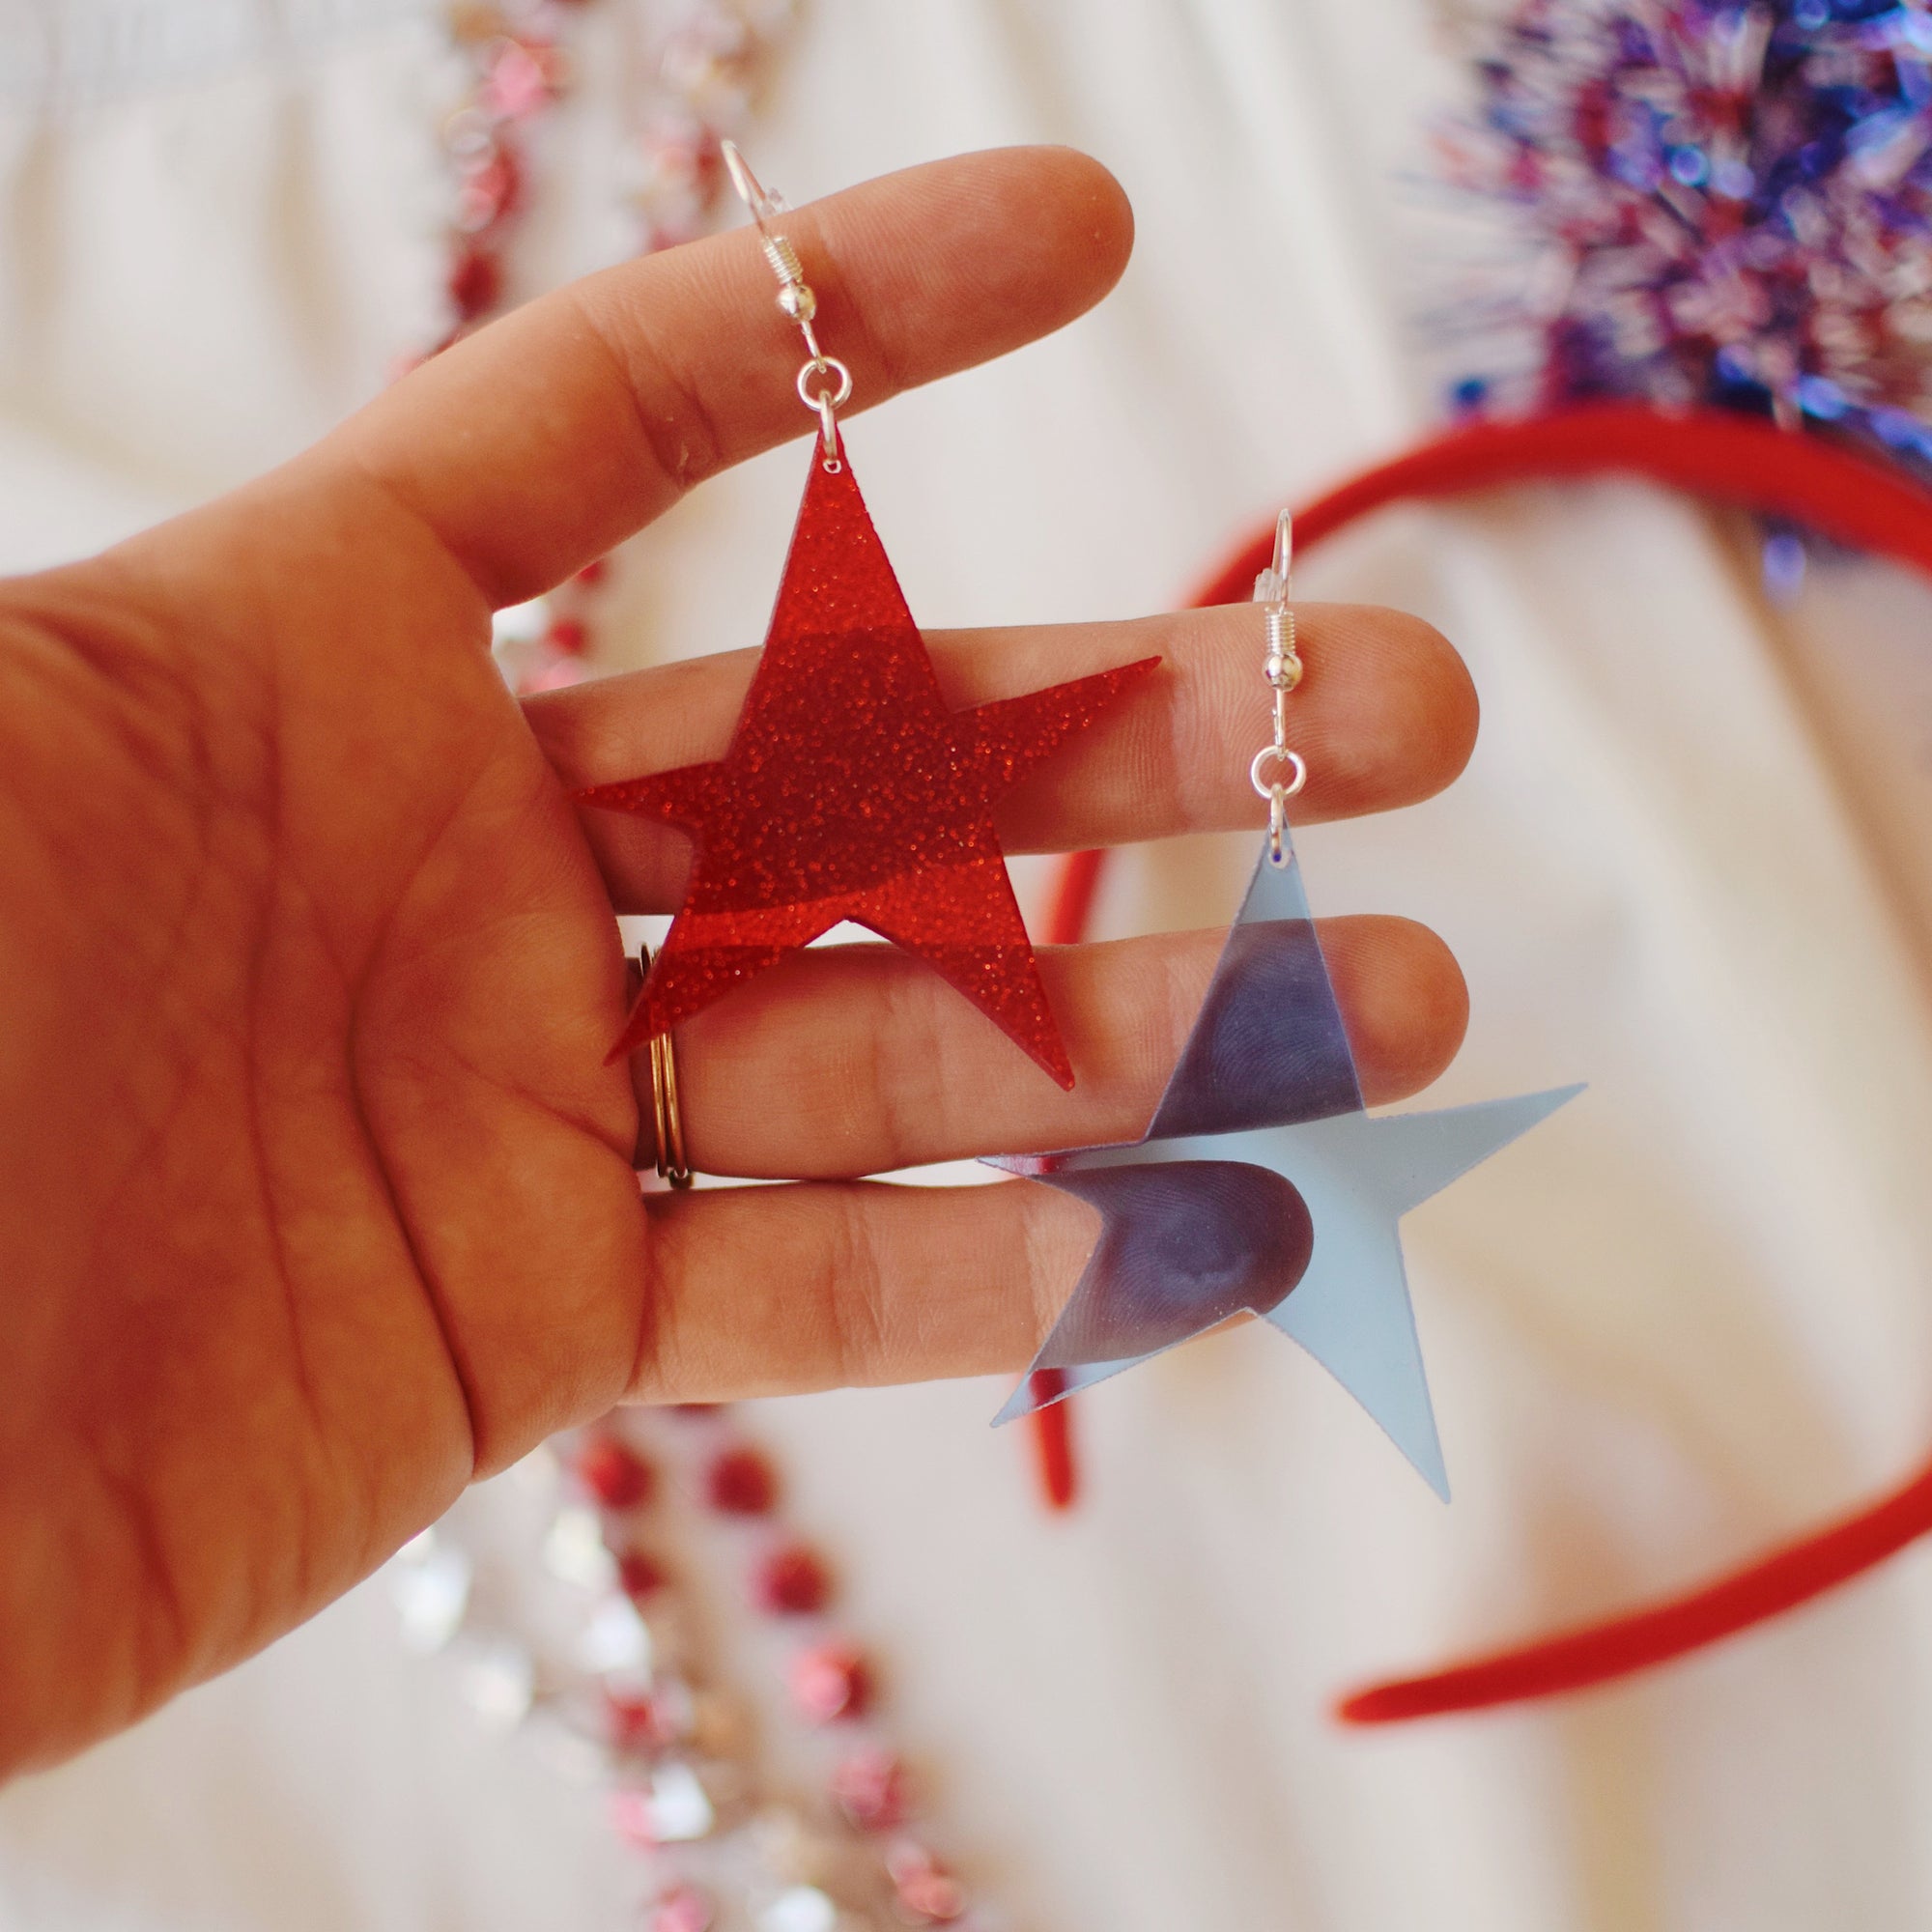 Earrings - 4th of July - Funky Star Dangles (Combo) - Sparkle Red/Translucent Blue